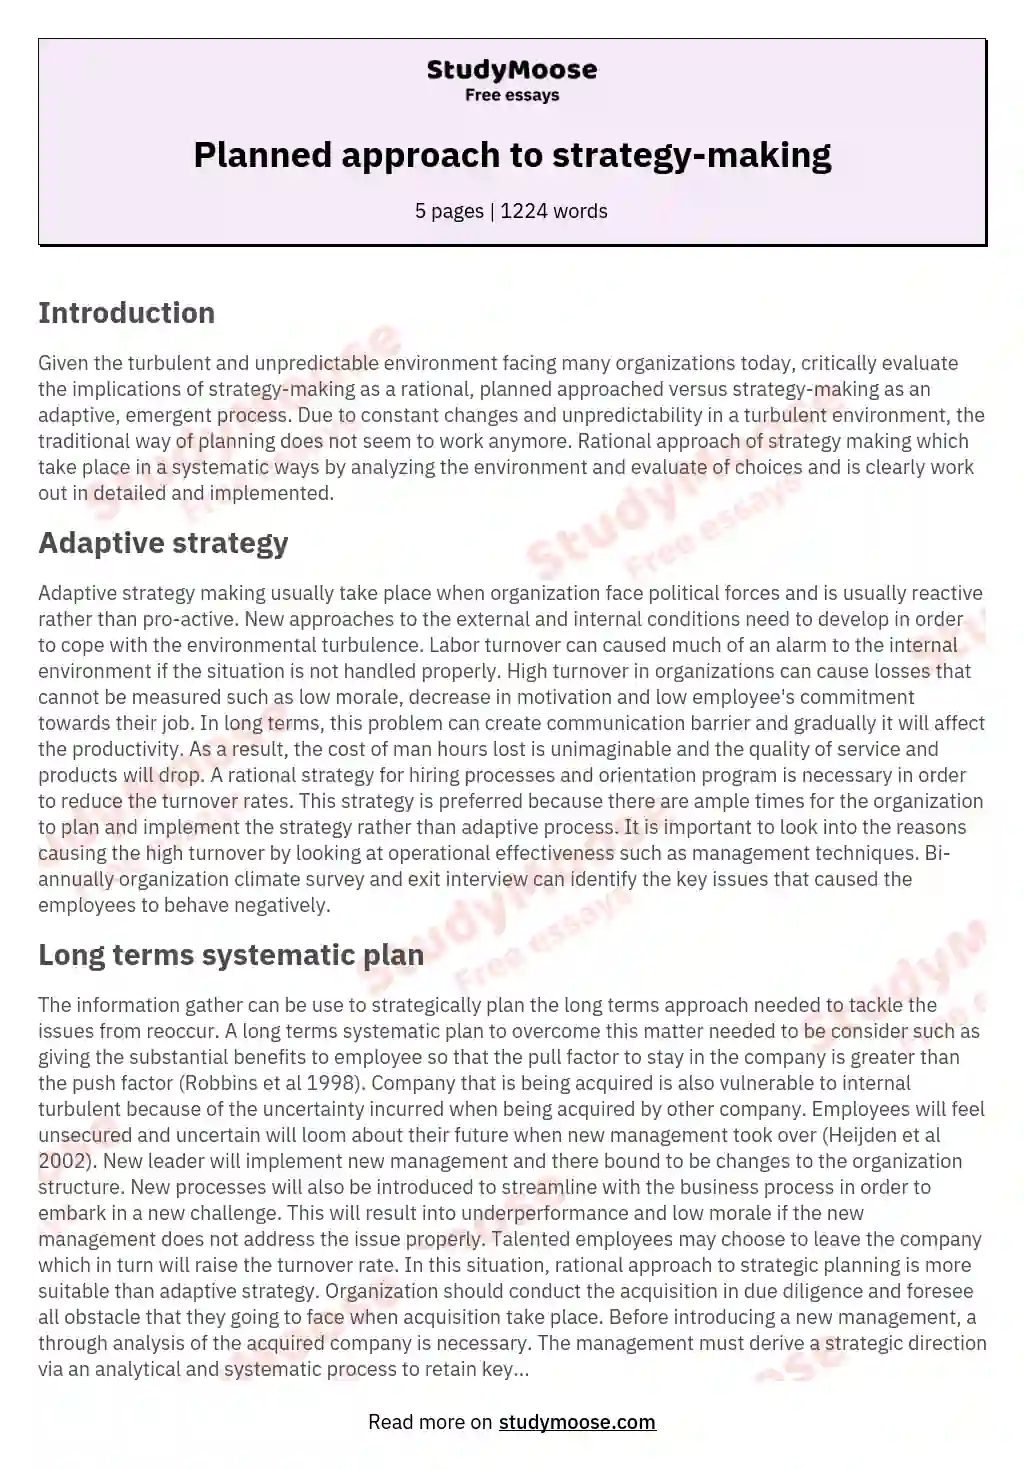 Planned approach to strategy-making essay